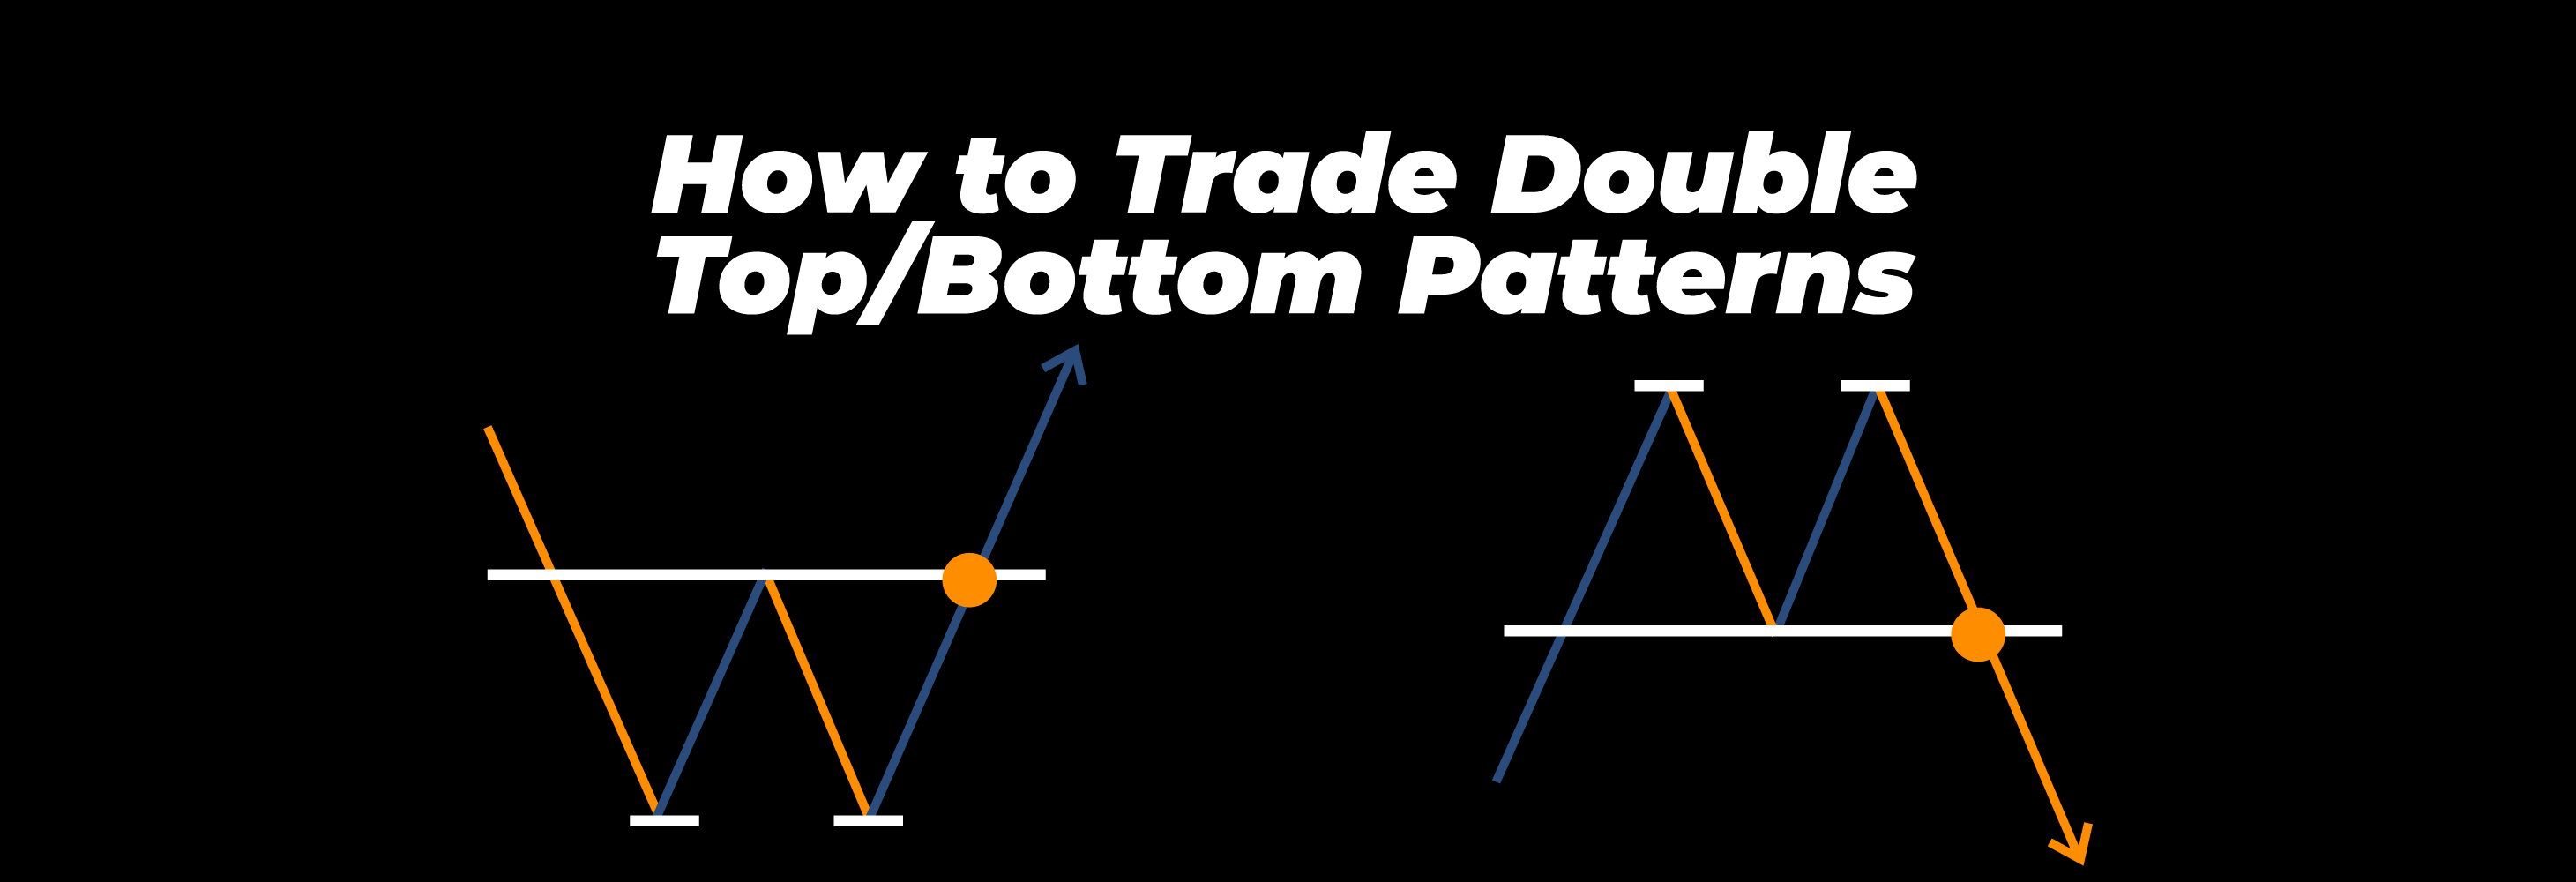 How to Trade Double Top/Bottom Patterns